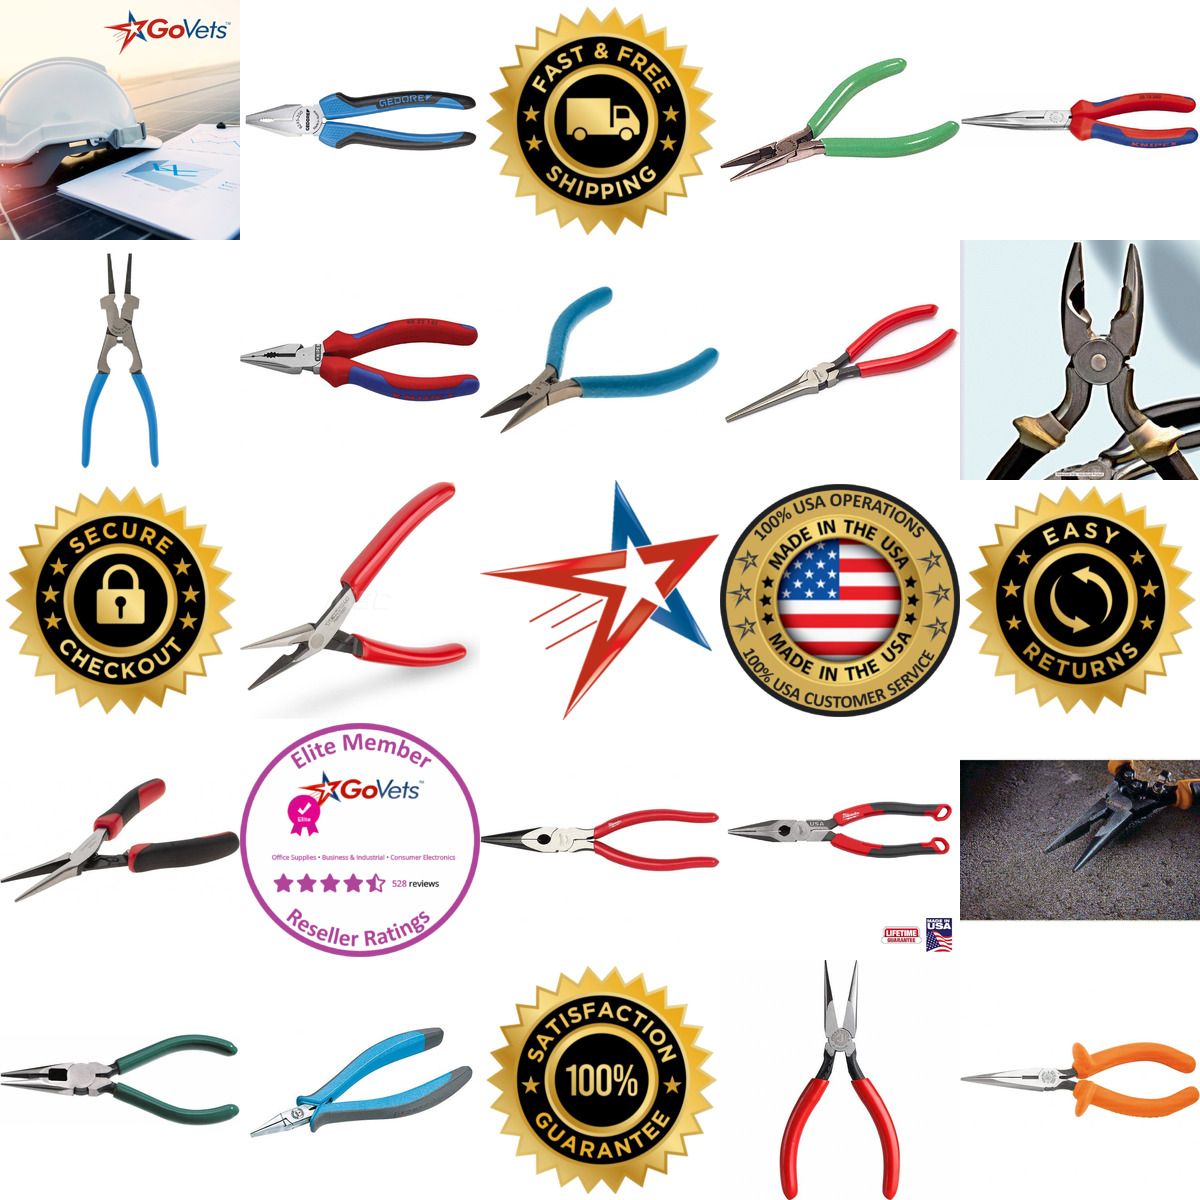 A selection of Long Nose Pliers products on GoVets